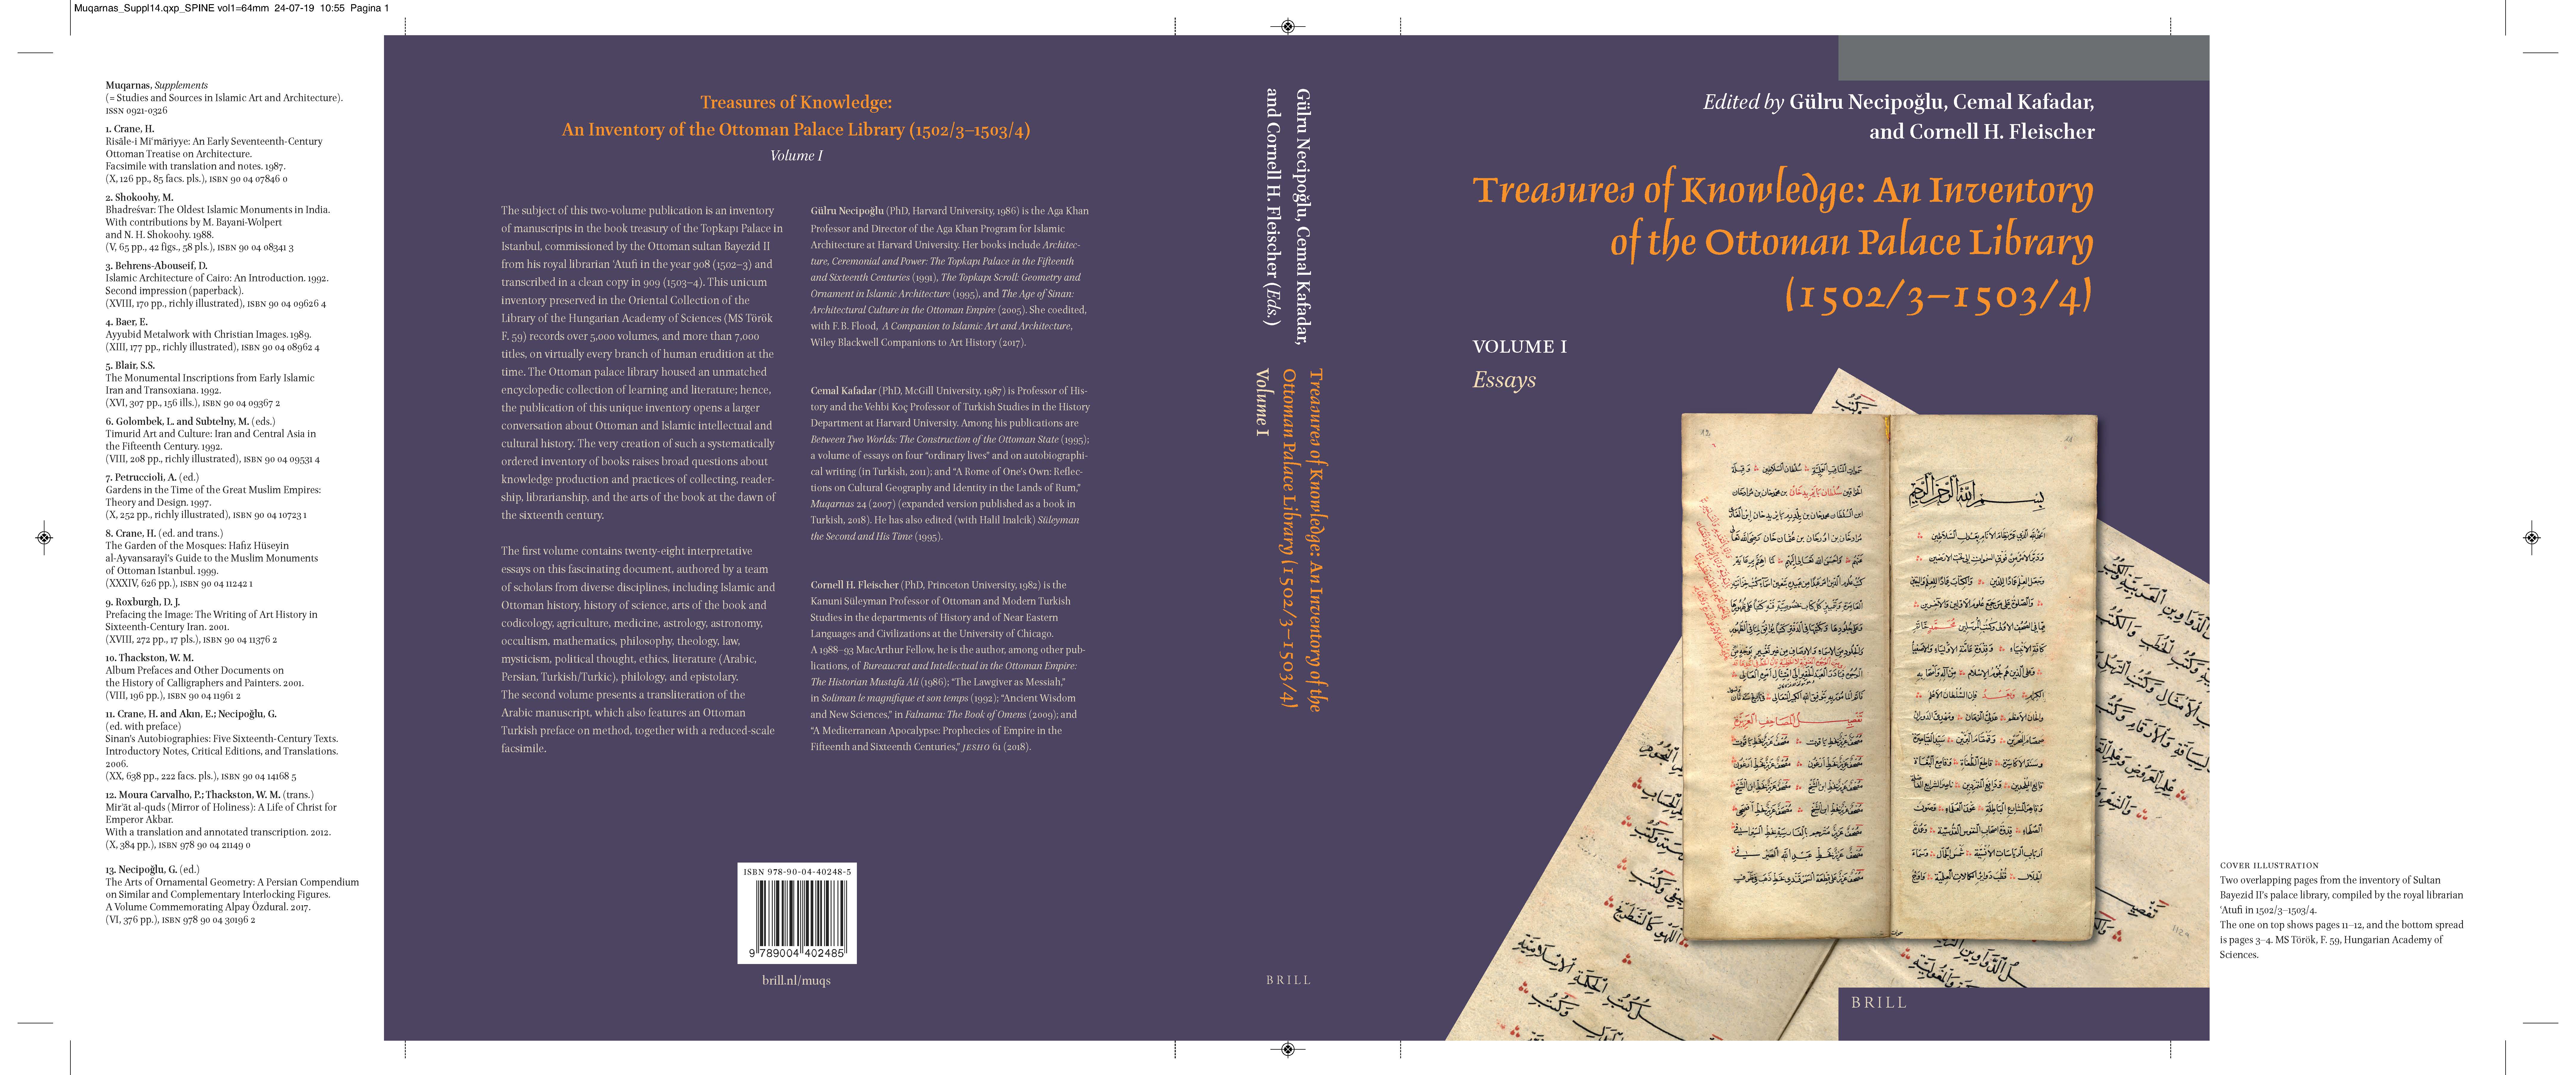 Treasures of Knowledge An Inventory of the Ottoman Palace Library (1502/3–1503/4) VOLUME I: ESSAYS